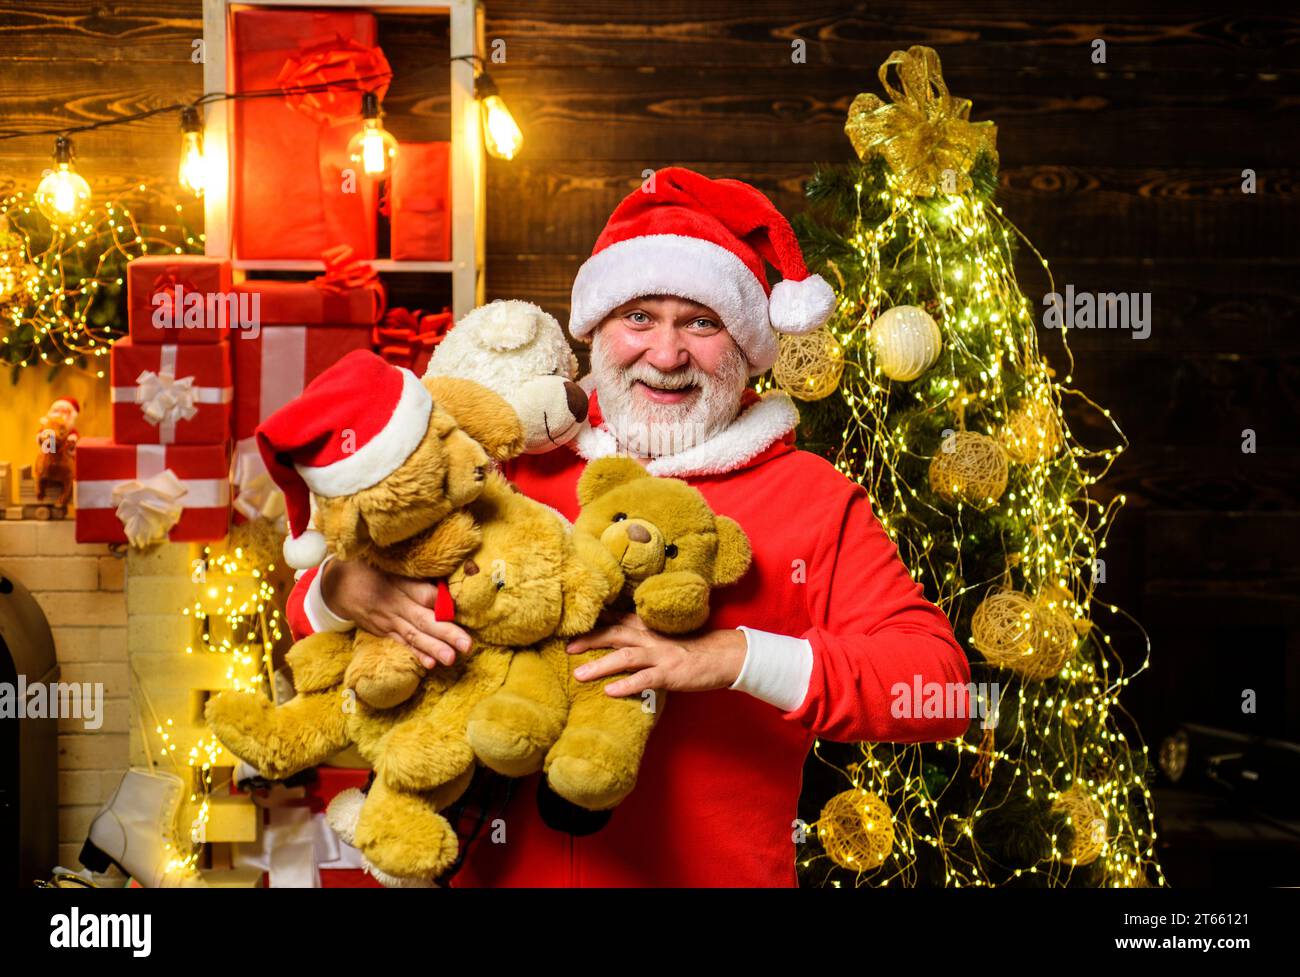 Christmas holidays. Smiling Santa Claus with many teddy bears. Bearded man in Santa hat with teddy bears in room decorated for Christmas. Santa man Stock Photo